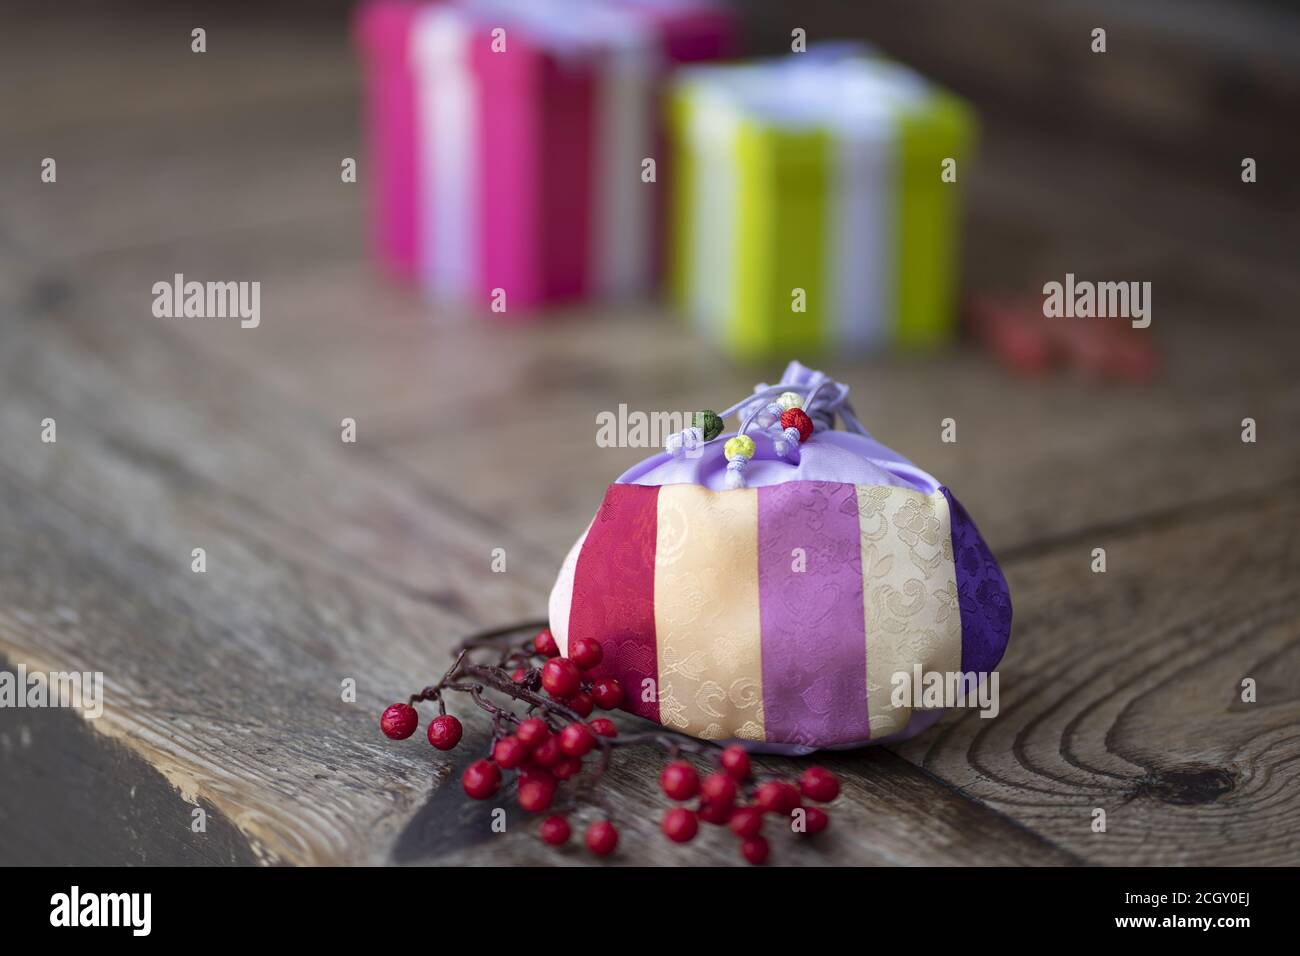 Happy new year's image of Korea, lucky bag and gift boxes Stock Photo